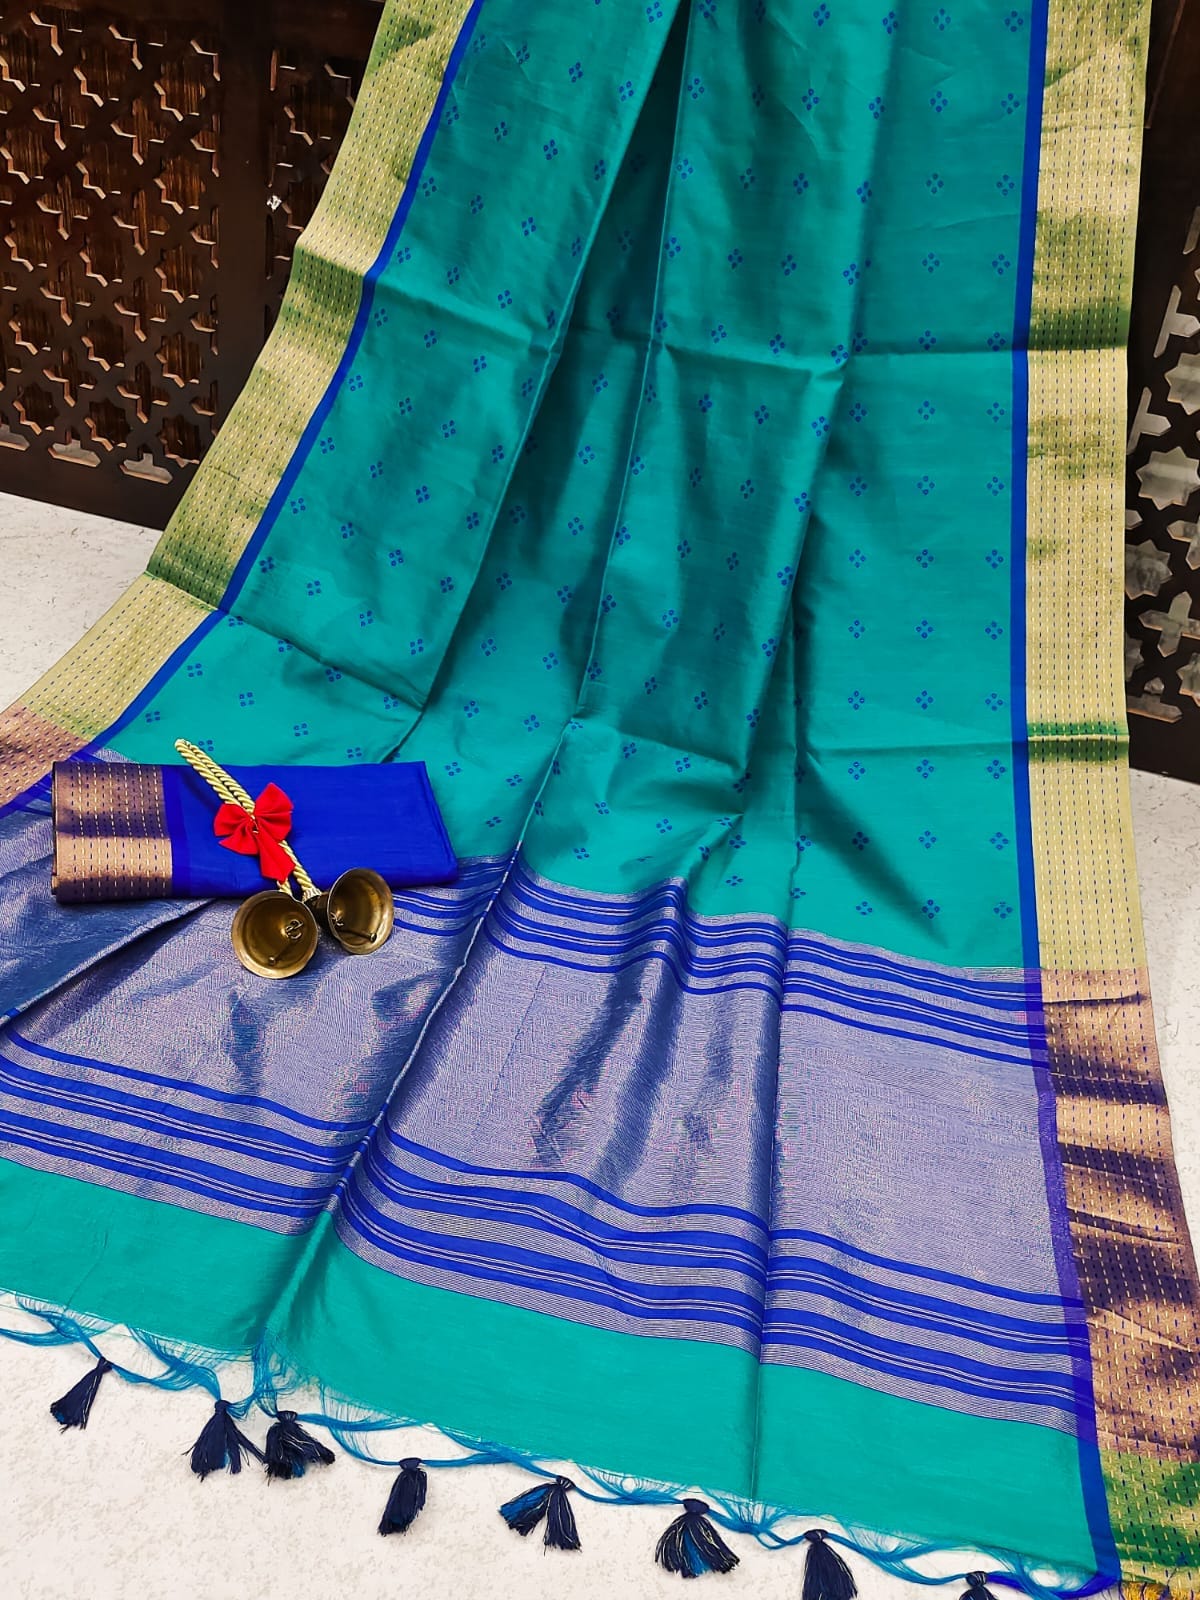 SOFT TUSSAR SEMI-SILK SAREE WITH ALL OVER BANDHANI STYLE 21027N